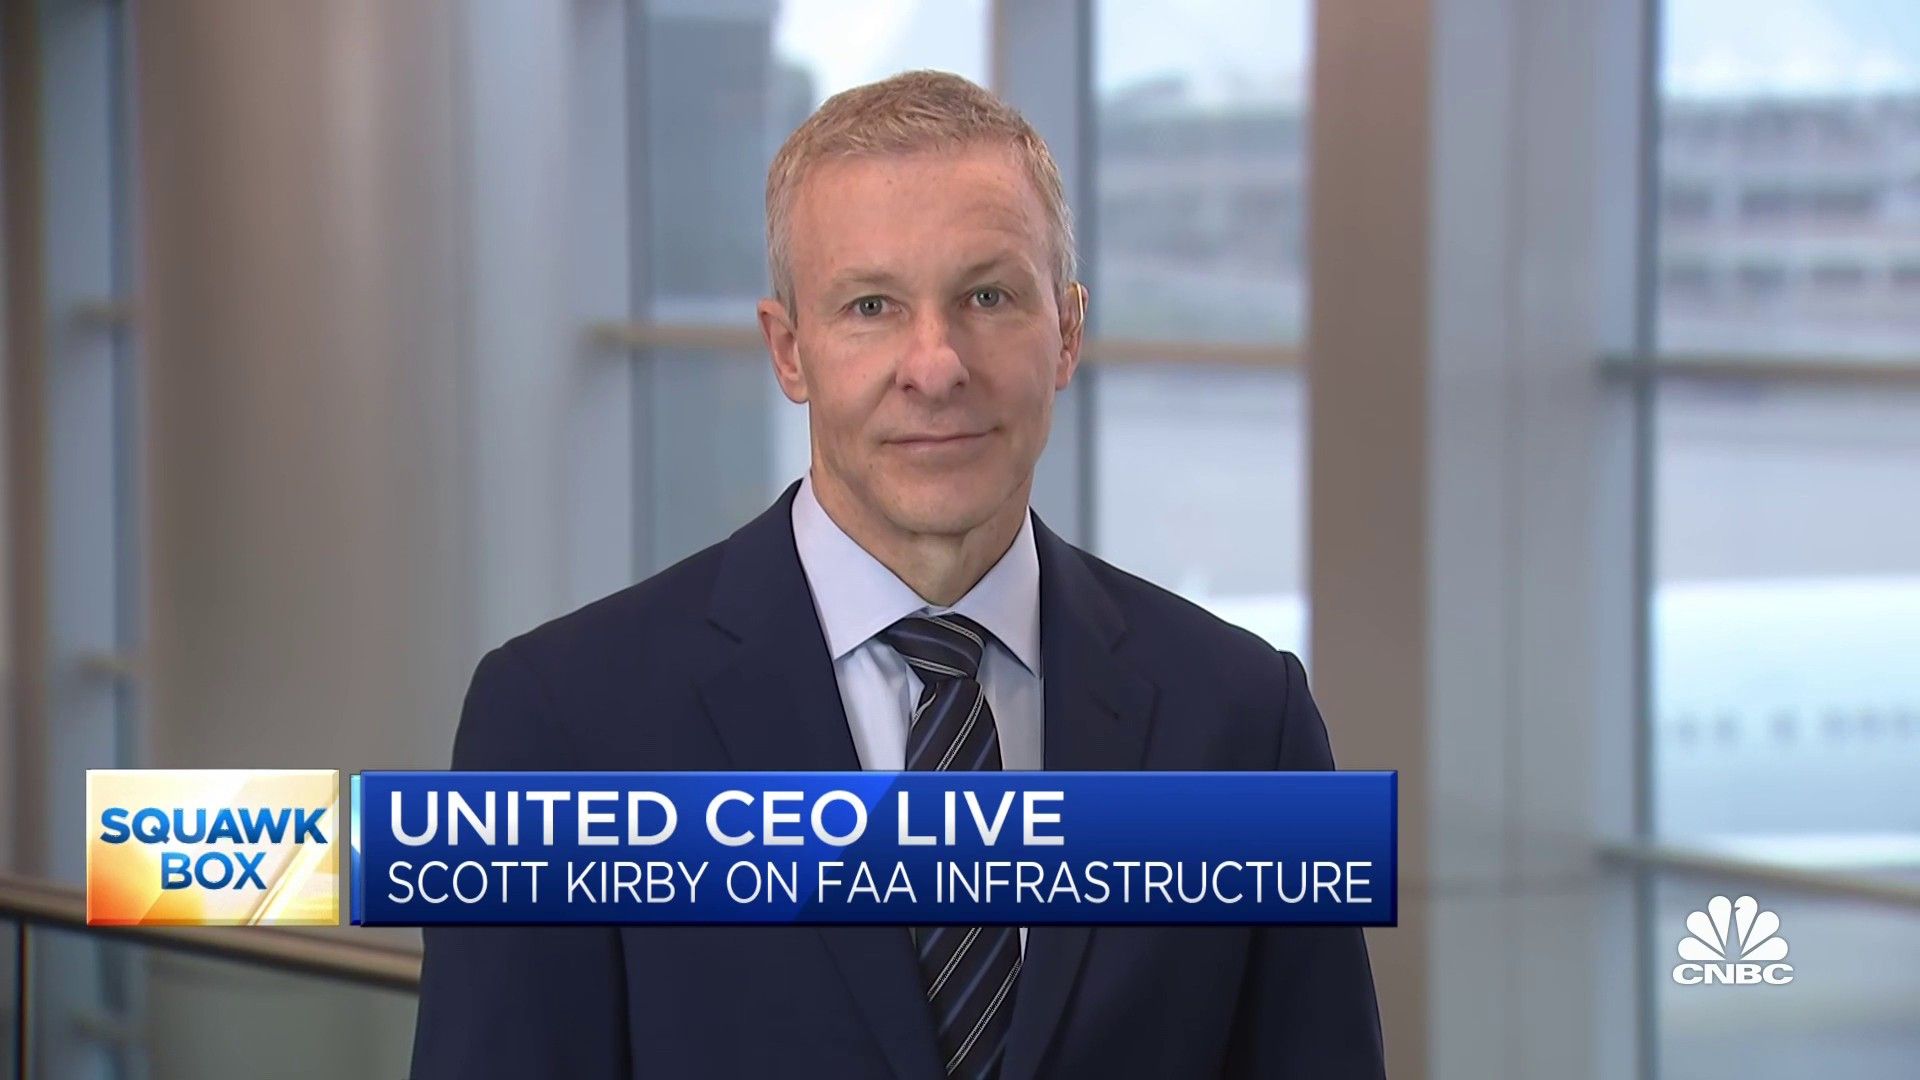                      United’s CEO Is Wrong to Blame the FAA for New York Flight Delays                             
                     